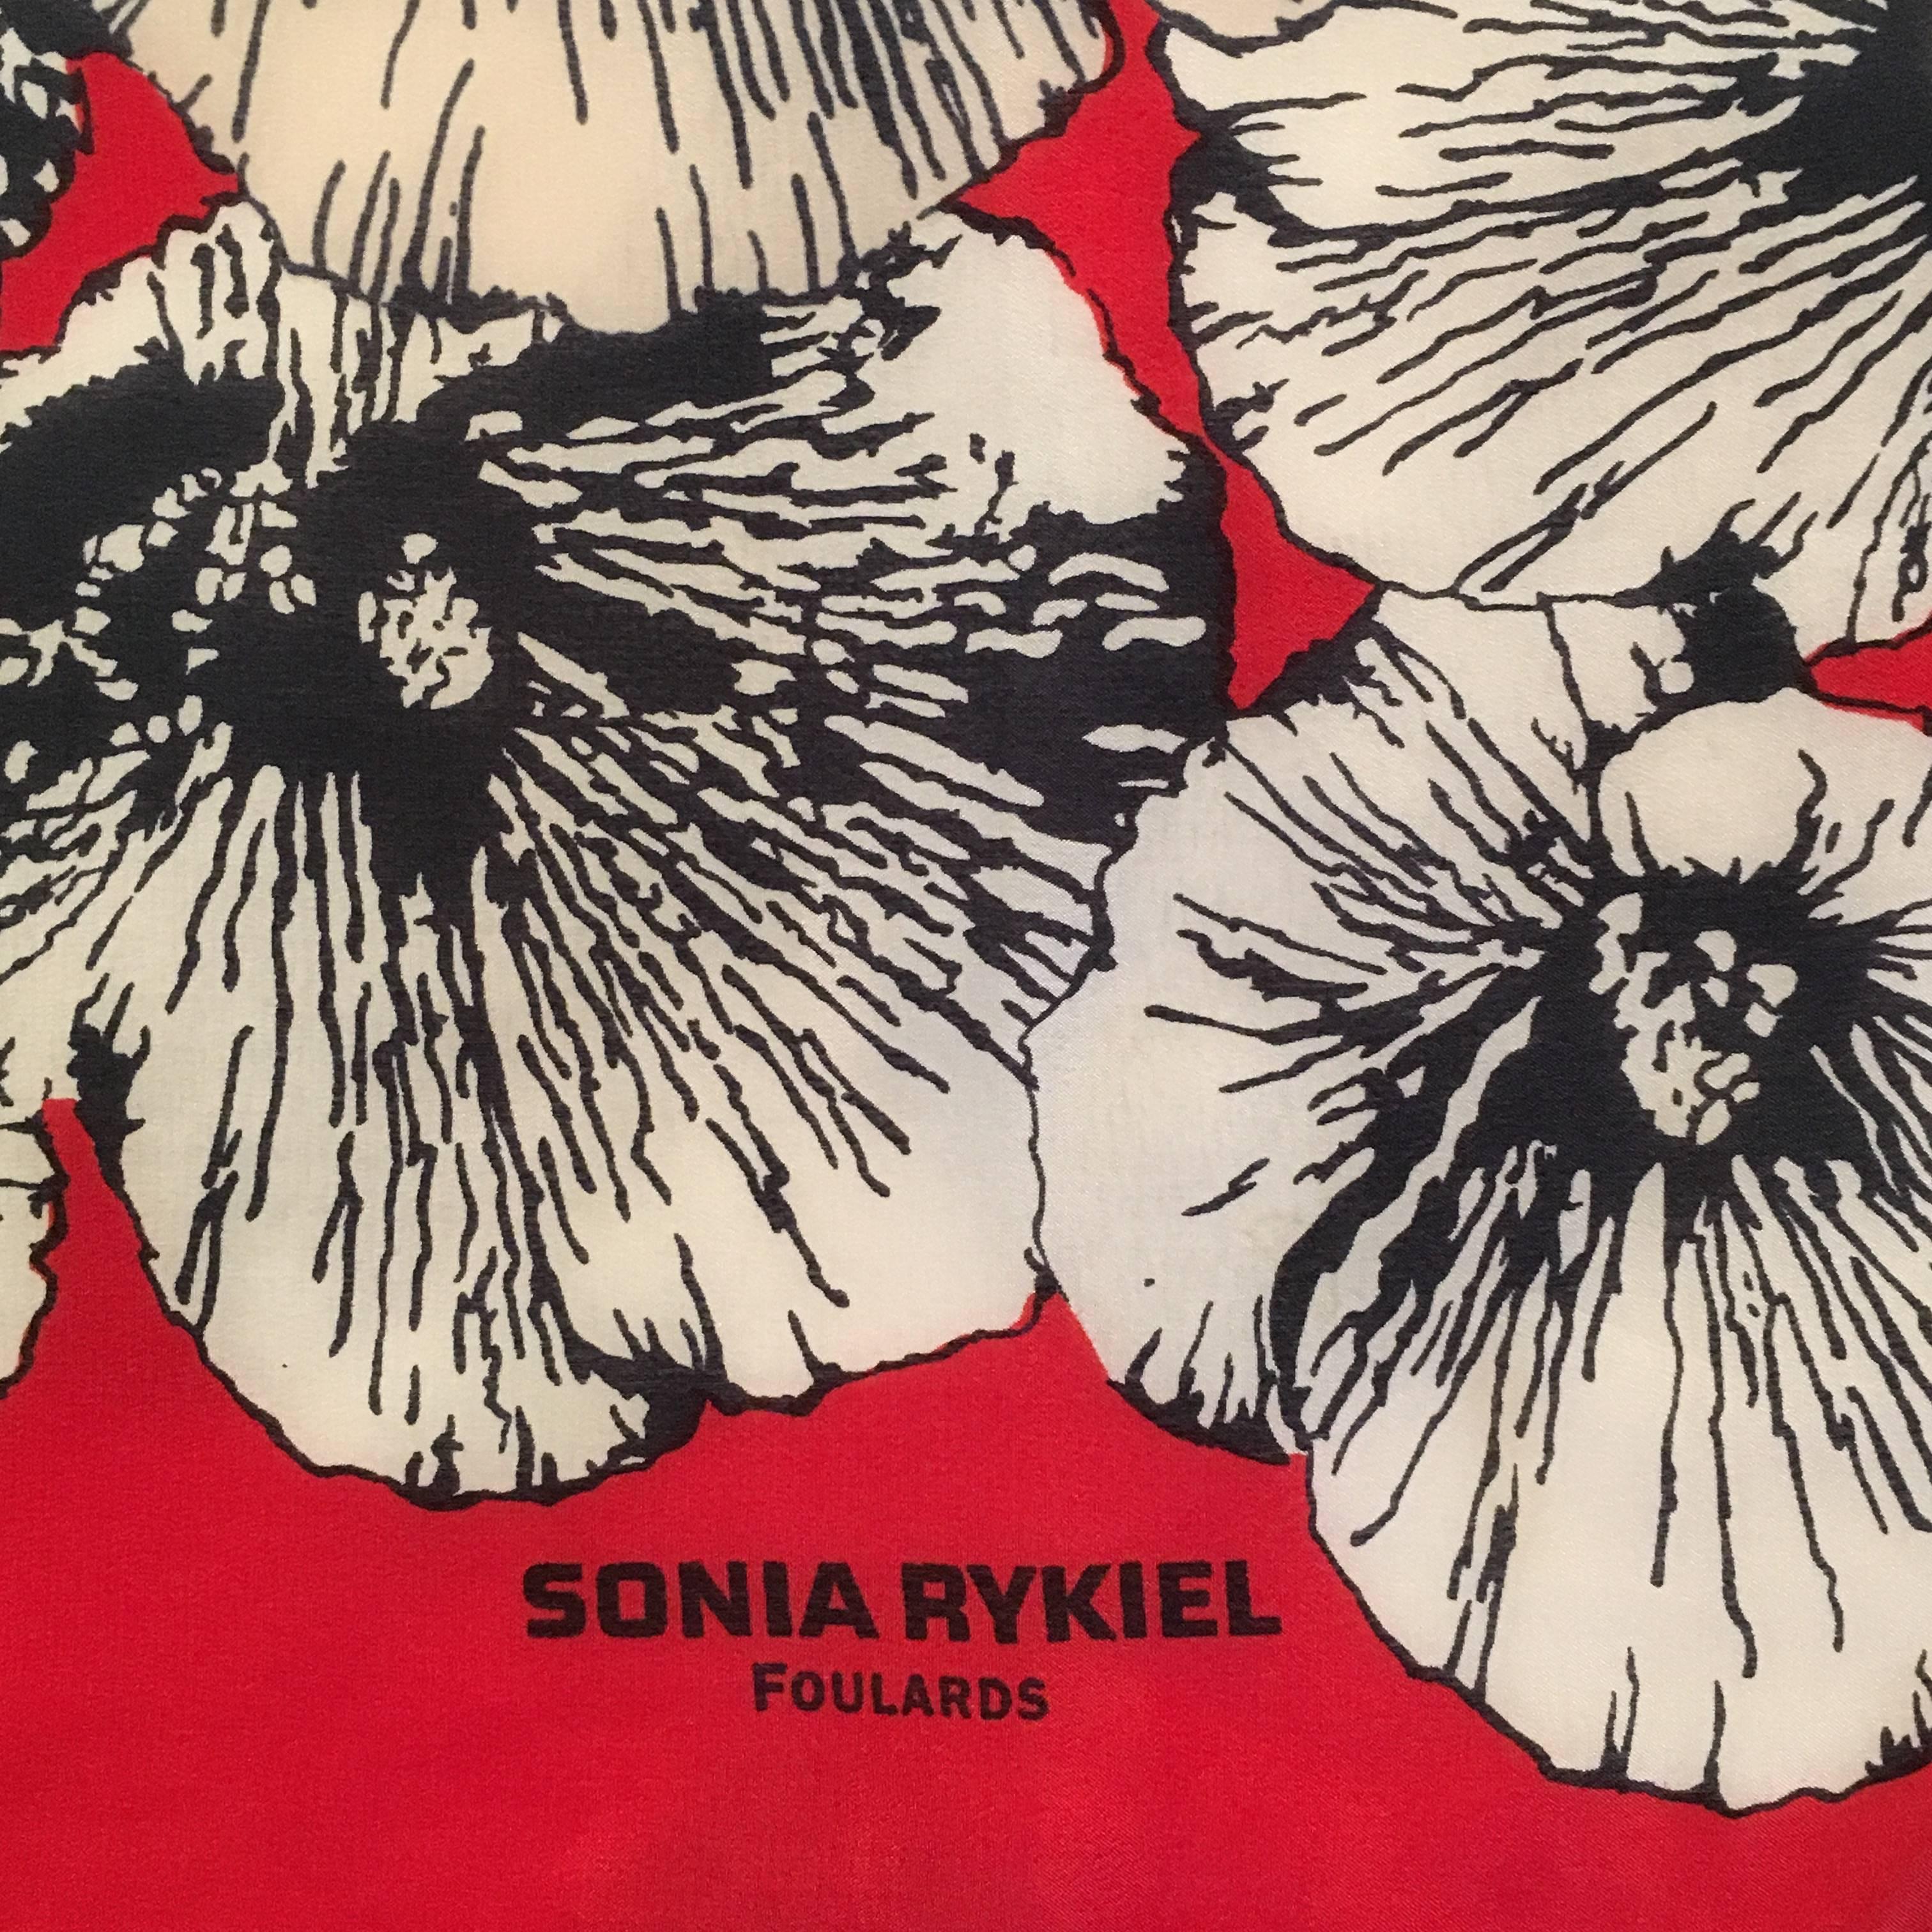 This is a large red Sonia Rykiel scarf with printed black and white poppy flowers. It measures 44 3/4